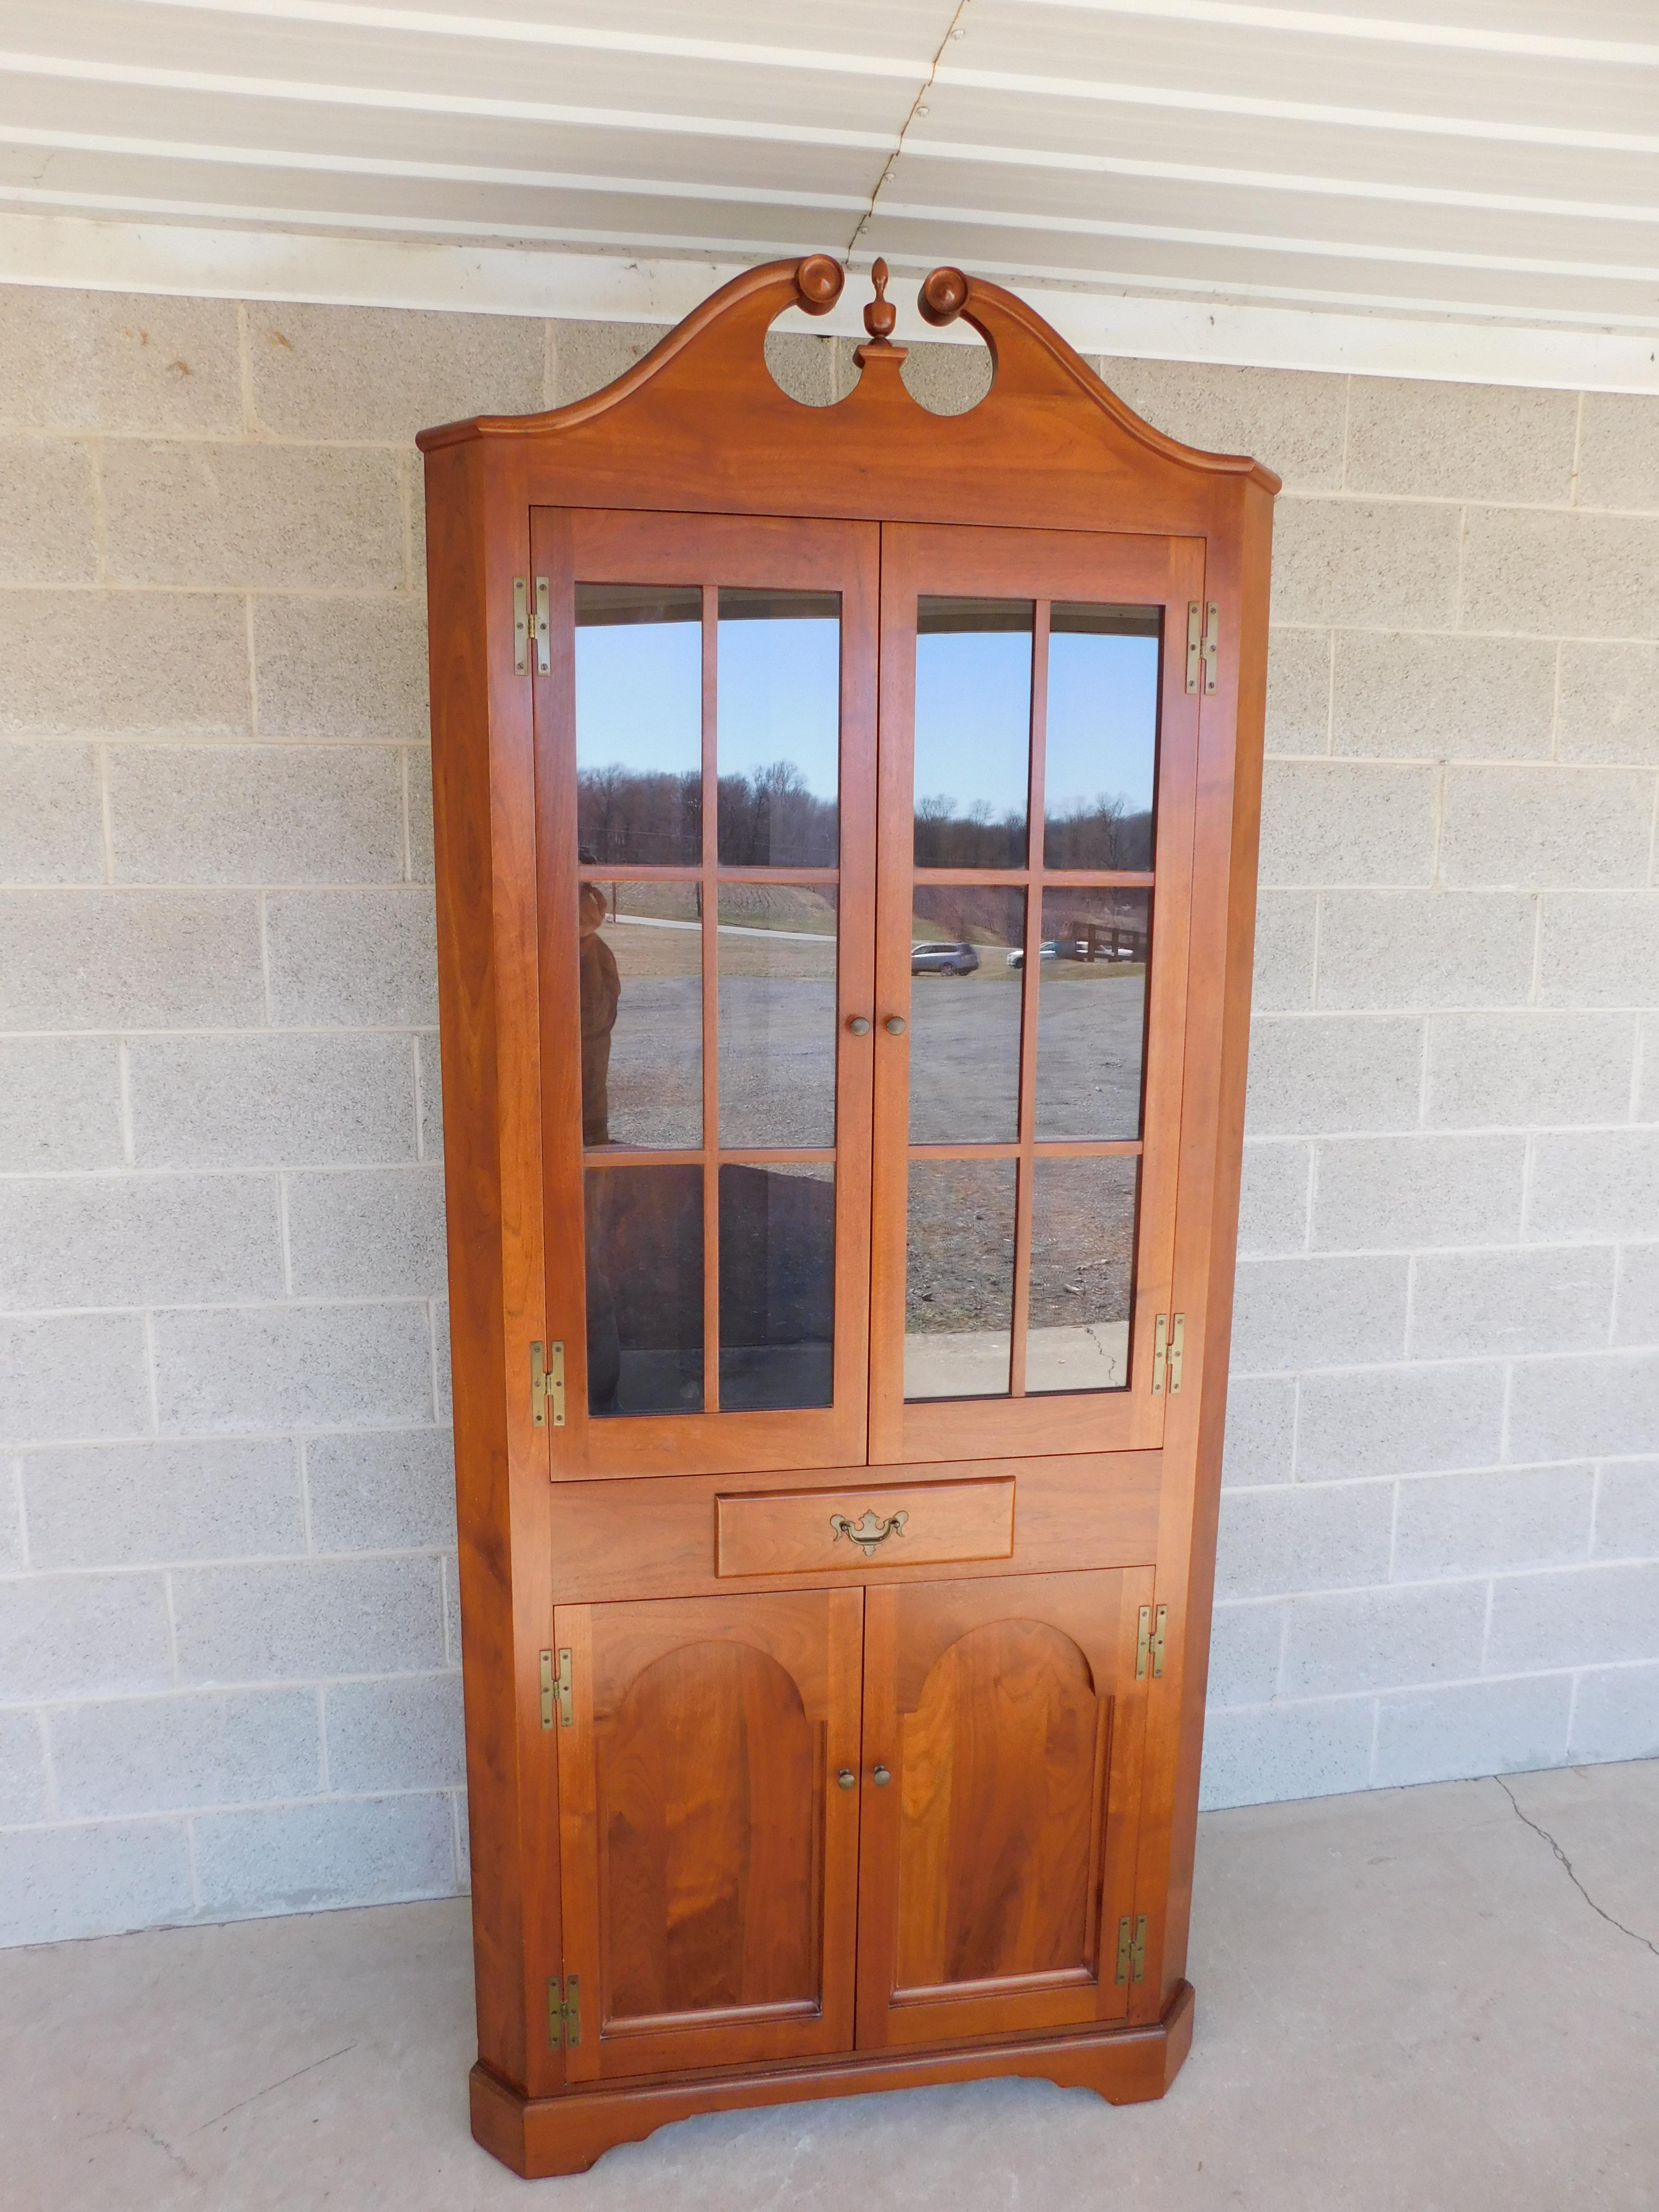 Features Quality handmade construction, beautiful black walnut wood grain, ( not signed ),broken arched pediment with finial, deep recessed panel doors, single dovetailed drawer, brass 